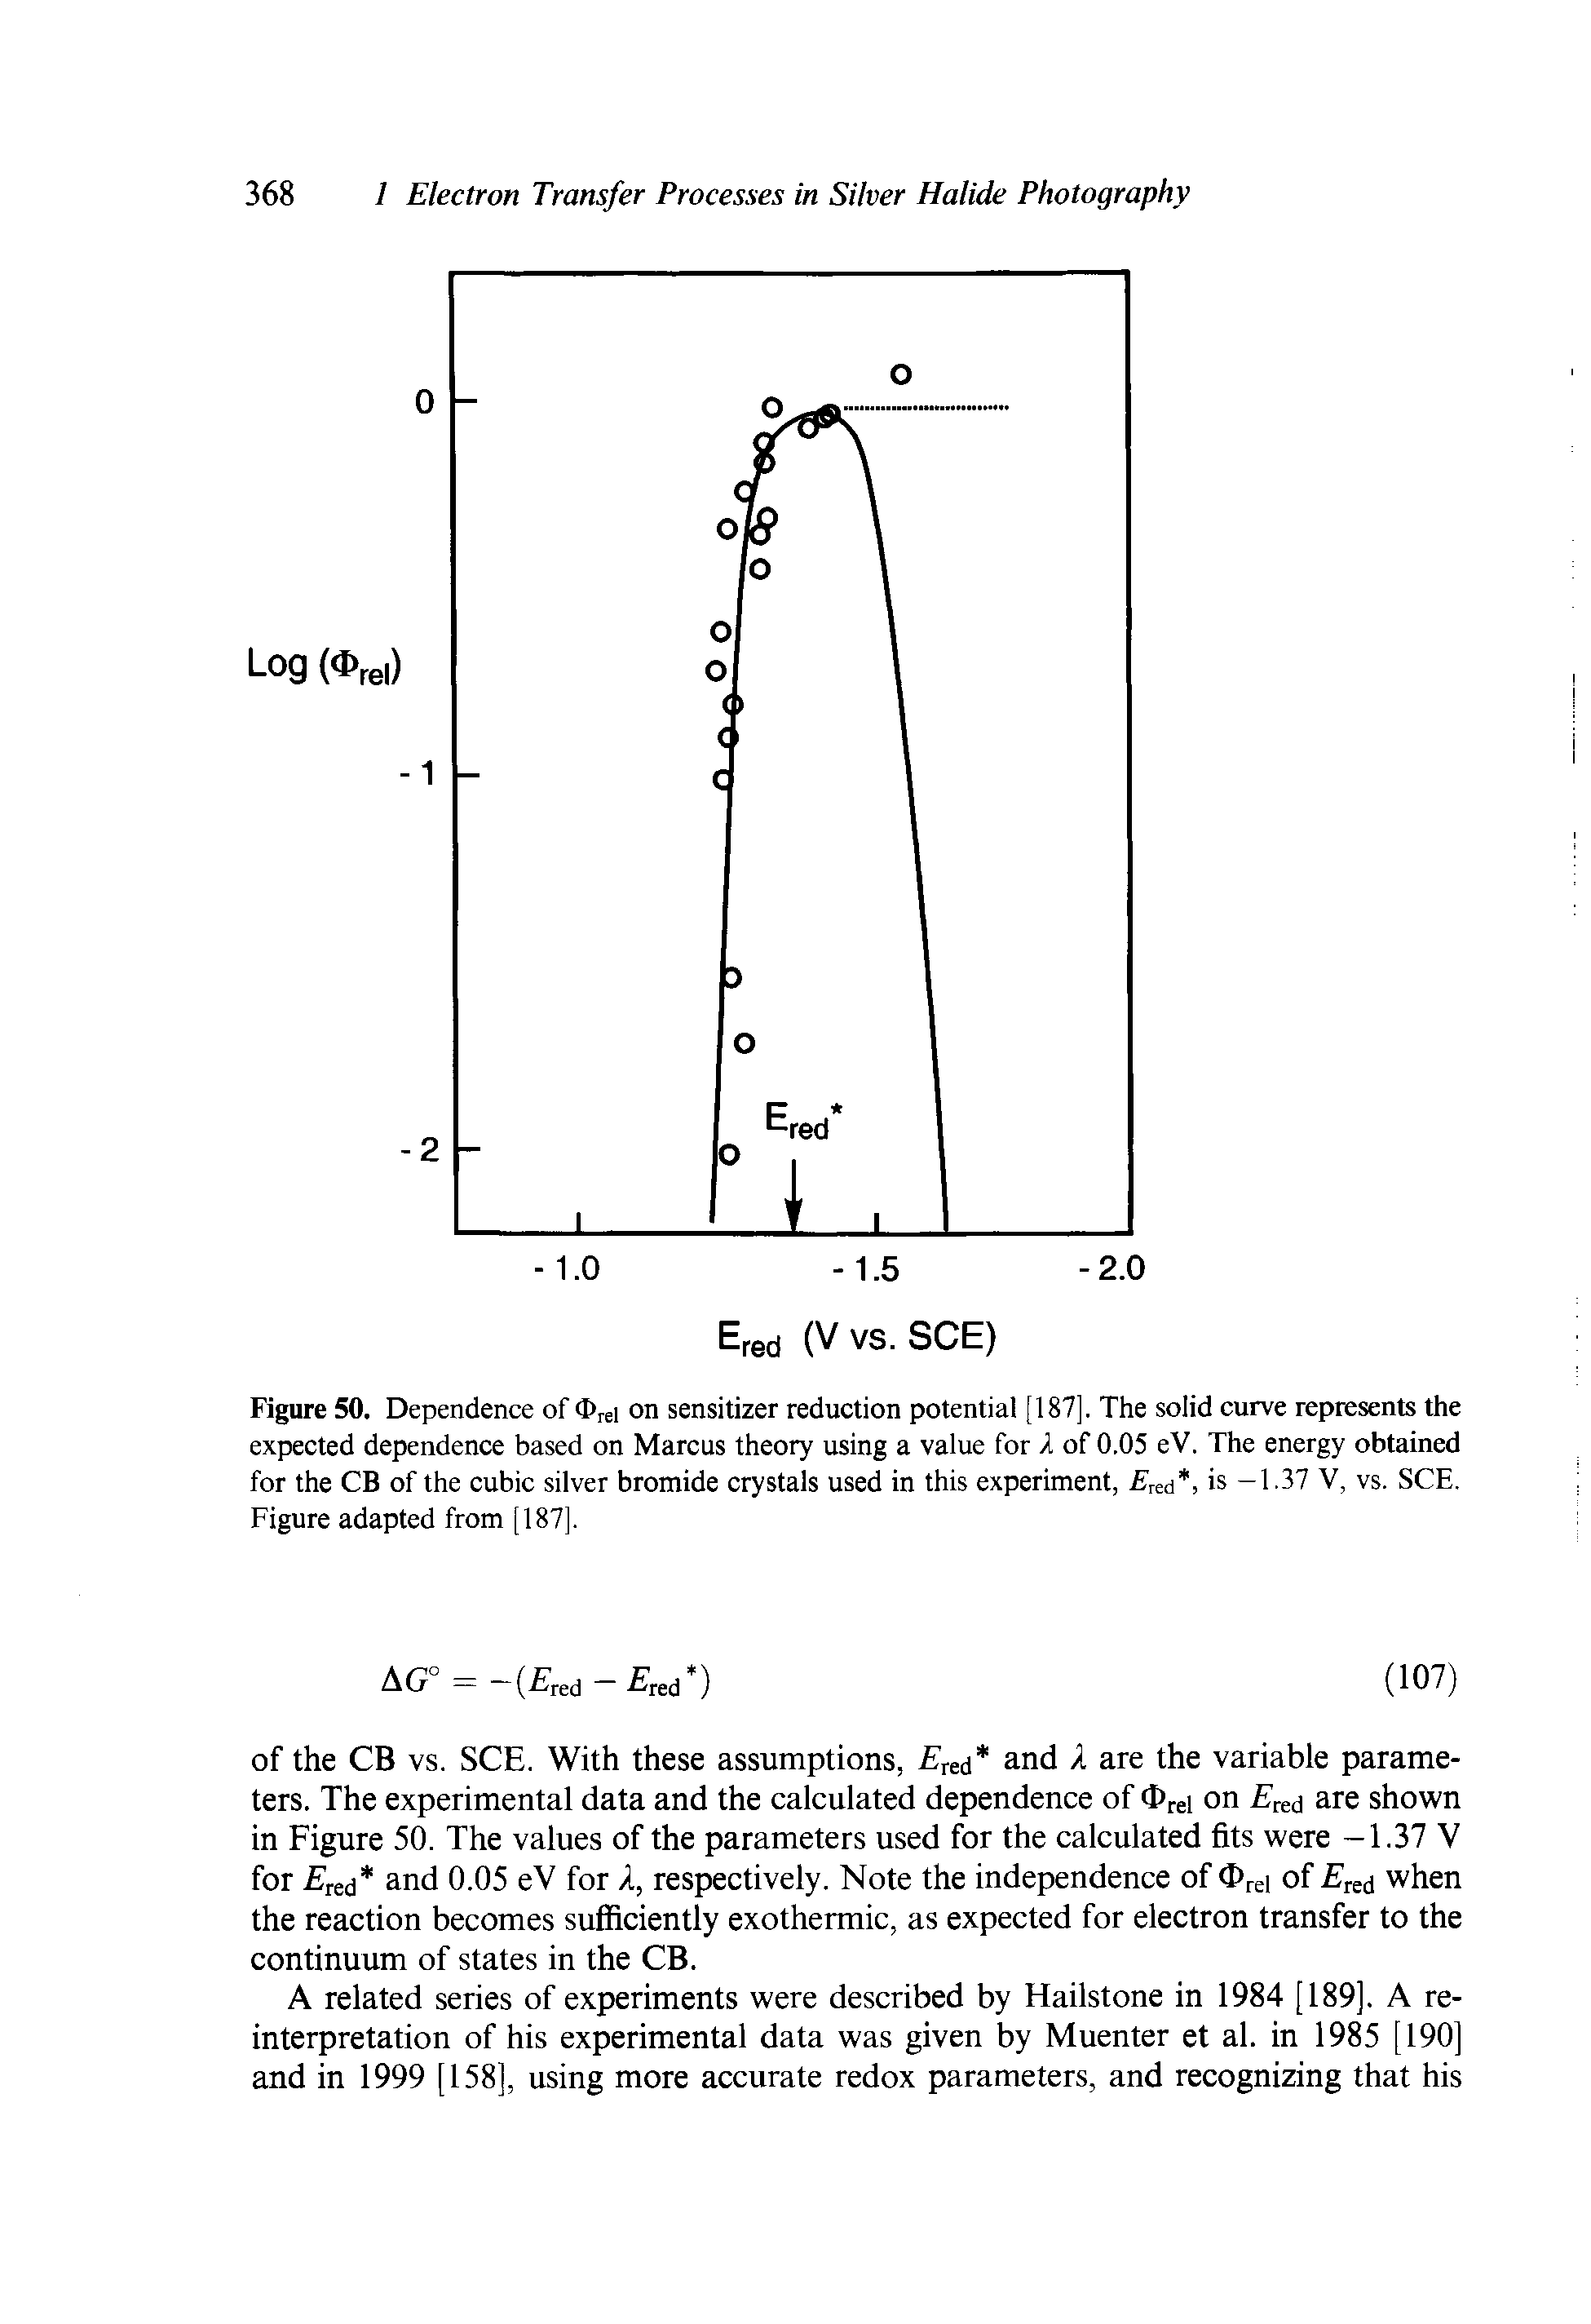 Figure 50. Dependence of Orel on sensitizer reduction potential [187], The solid curve represents the expected dependence based on Marcus theory using a value for I of 0,05 eV. The energy obtained for the CB of the cubic silver bromide crystals used in this experiment, F red, is -1.37 V, vs. SCE. Figure adapted from [187].